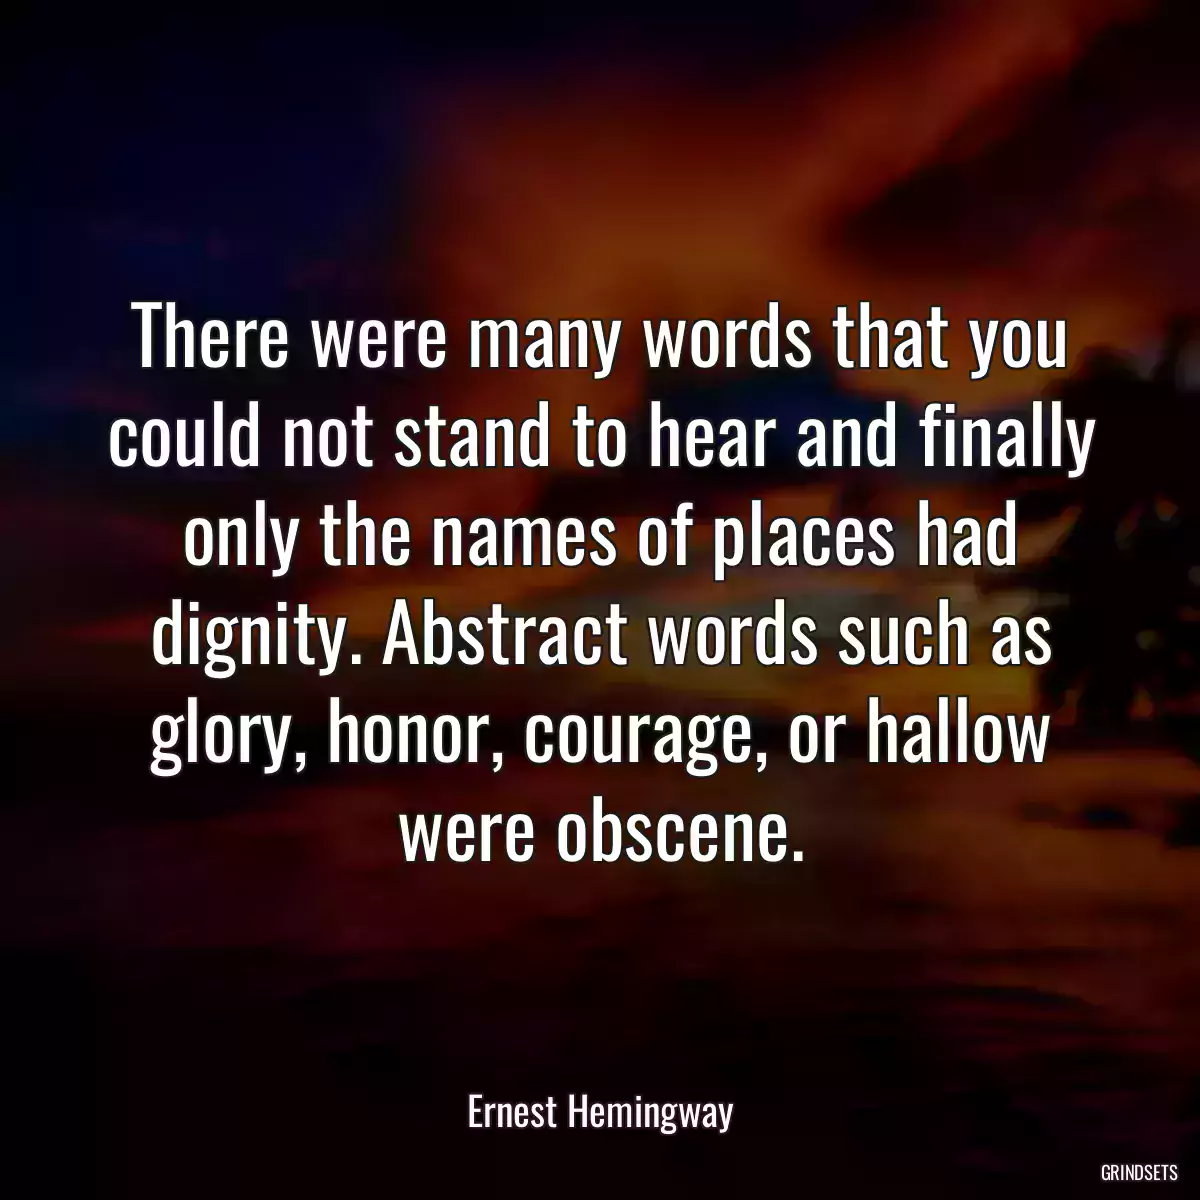 There were many words that you could not stand to hear and finally only the names of places had dignity. Abstract words such as glory, honor, courage, or hallow were obscene.